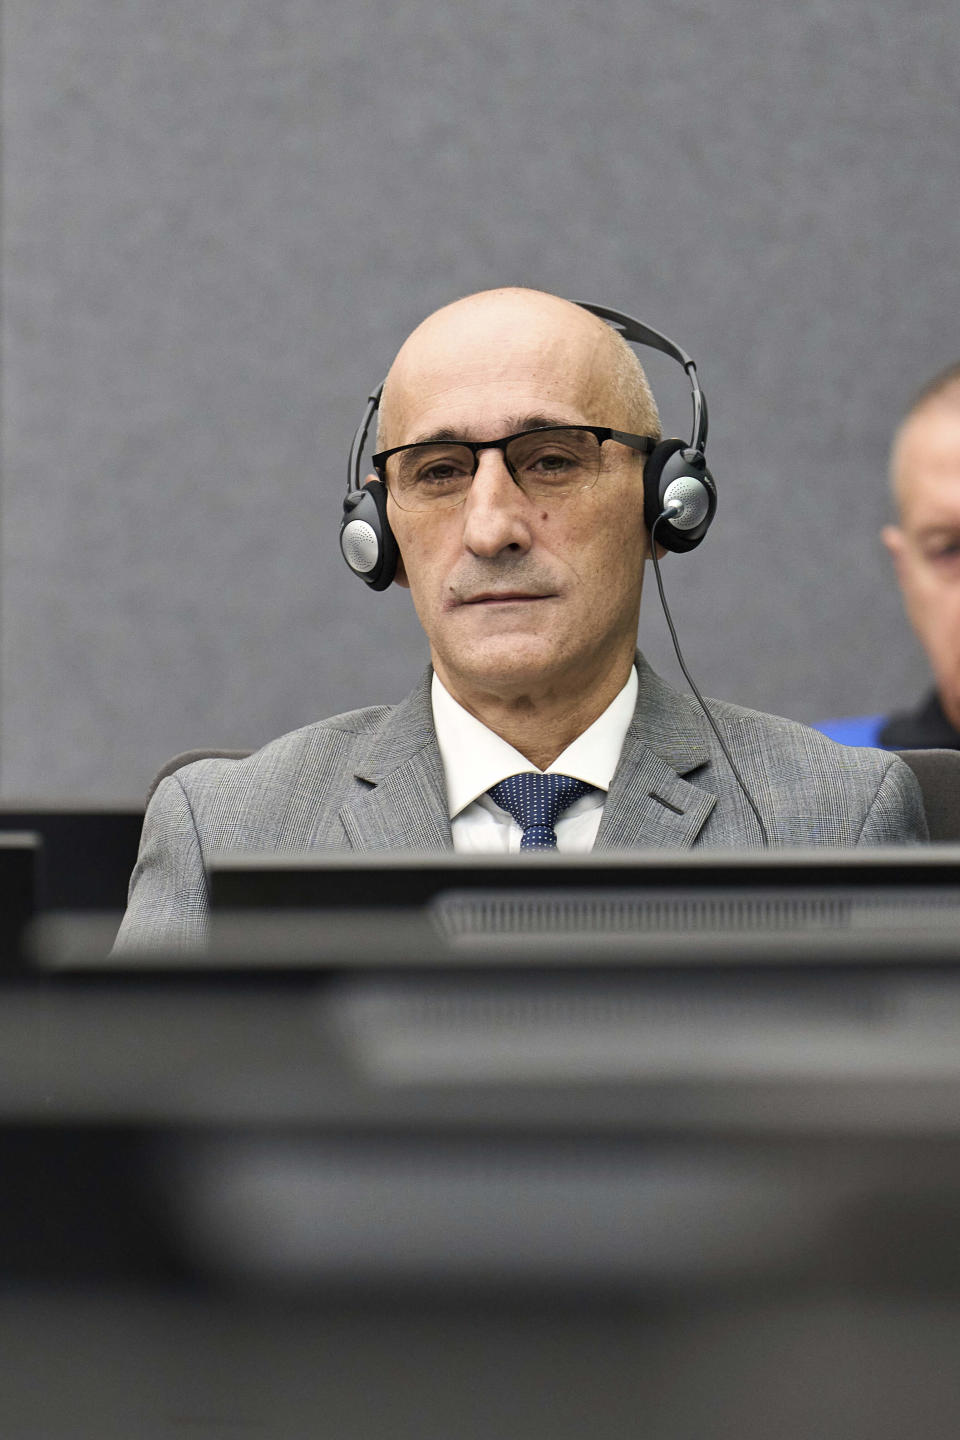 Salih Mustafa sits at a special Kosovo court in The Hague, Netherlands, Thursday, Dec. 14, 2023. Appeals judges at a special Kosovo court in the Netherlands were ruling Thursday in case of a former commander in the Kosovo Liberation Army who was convicted a year ago for arbitrarily detaining and torturing prisoners and murdering one of them during a late 1990s war for Kosovo’s independence. The commander, Salih Mustafa, was convicted a year ago and sentenced to 26 years’ imprisonment for the crimes committed at a KLA compound in Zllash, Kosovo, in April 1999. He was acquitted of one charge of mistreating detainees who were perceived as supporters of Serbia. (AP Photo/Phil Nijhuis, Pool)